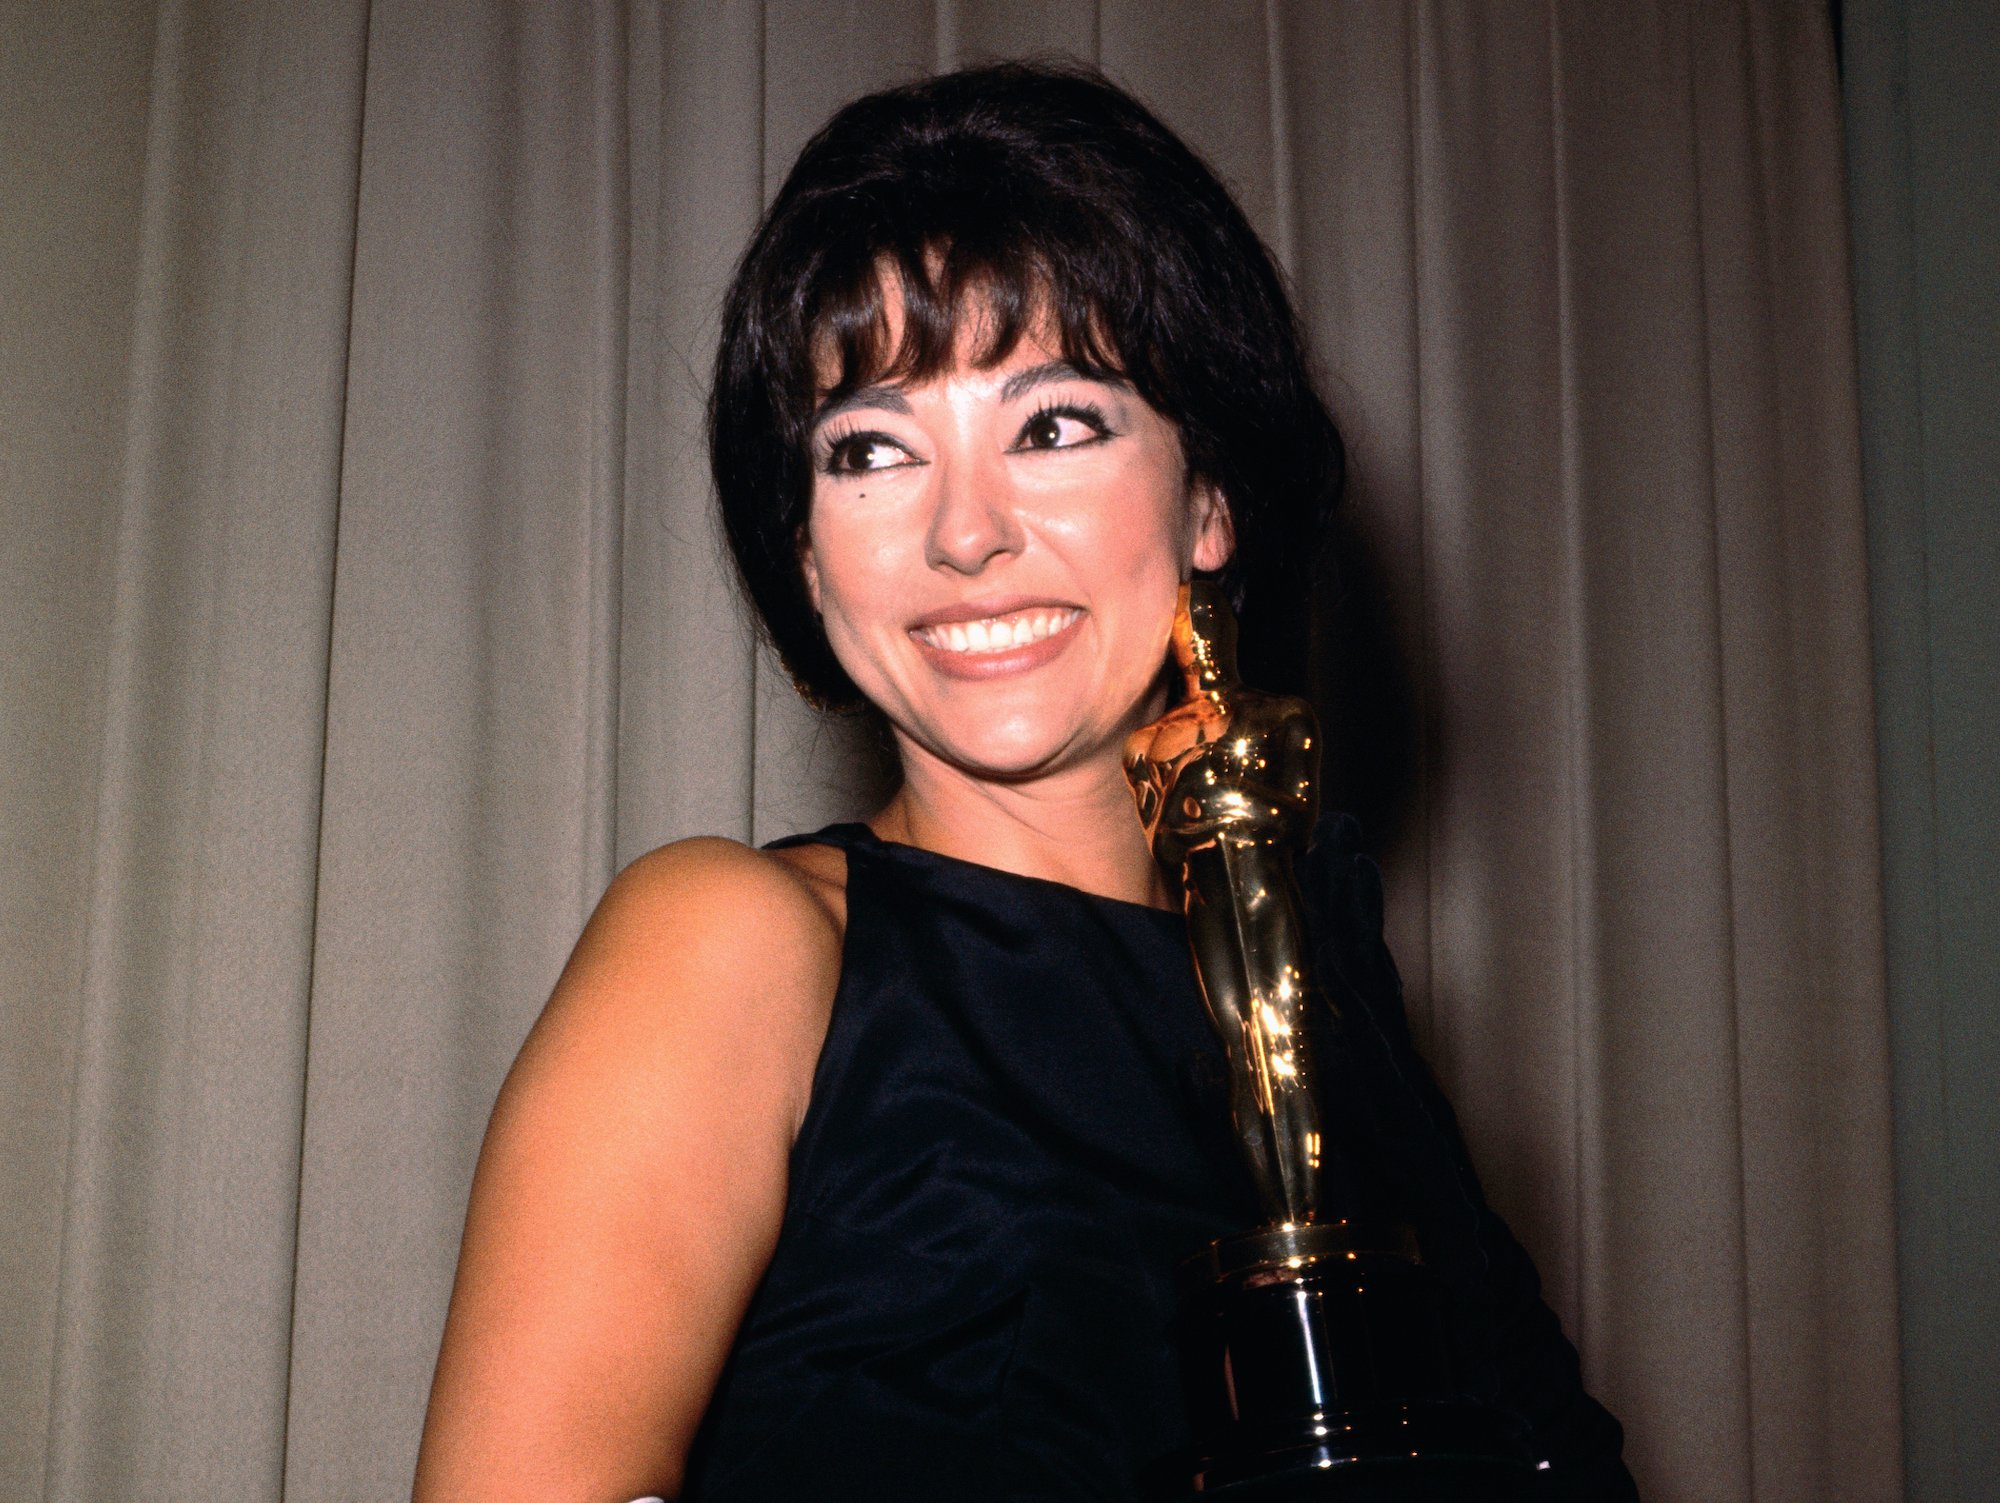 Rita Moreno holding her Academy Award for her performance as Anita in 'West Side Story.' Moreno smiles in a black and gold dress and long black gloves as she holds the golden Oscar statuette in her hands backstage at the 1962 ceremony.